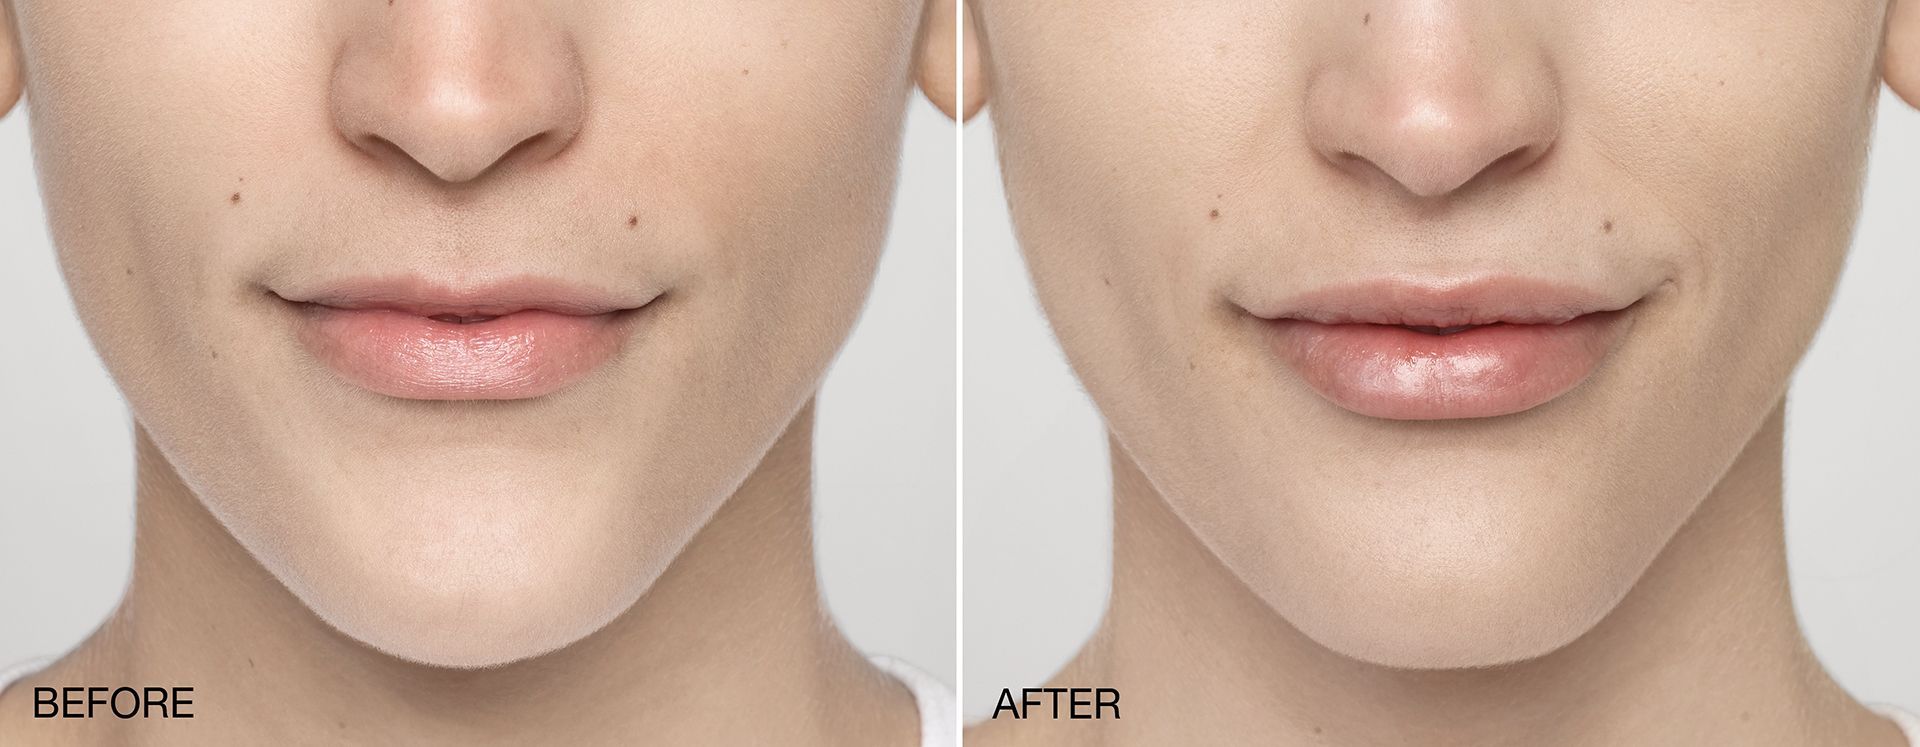 real patient shown before and after treatment with Restylane collection of fillers